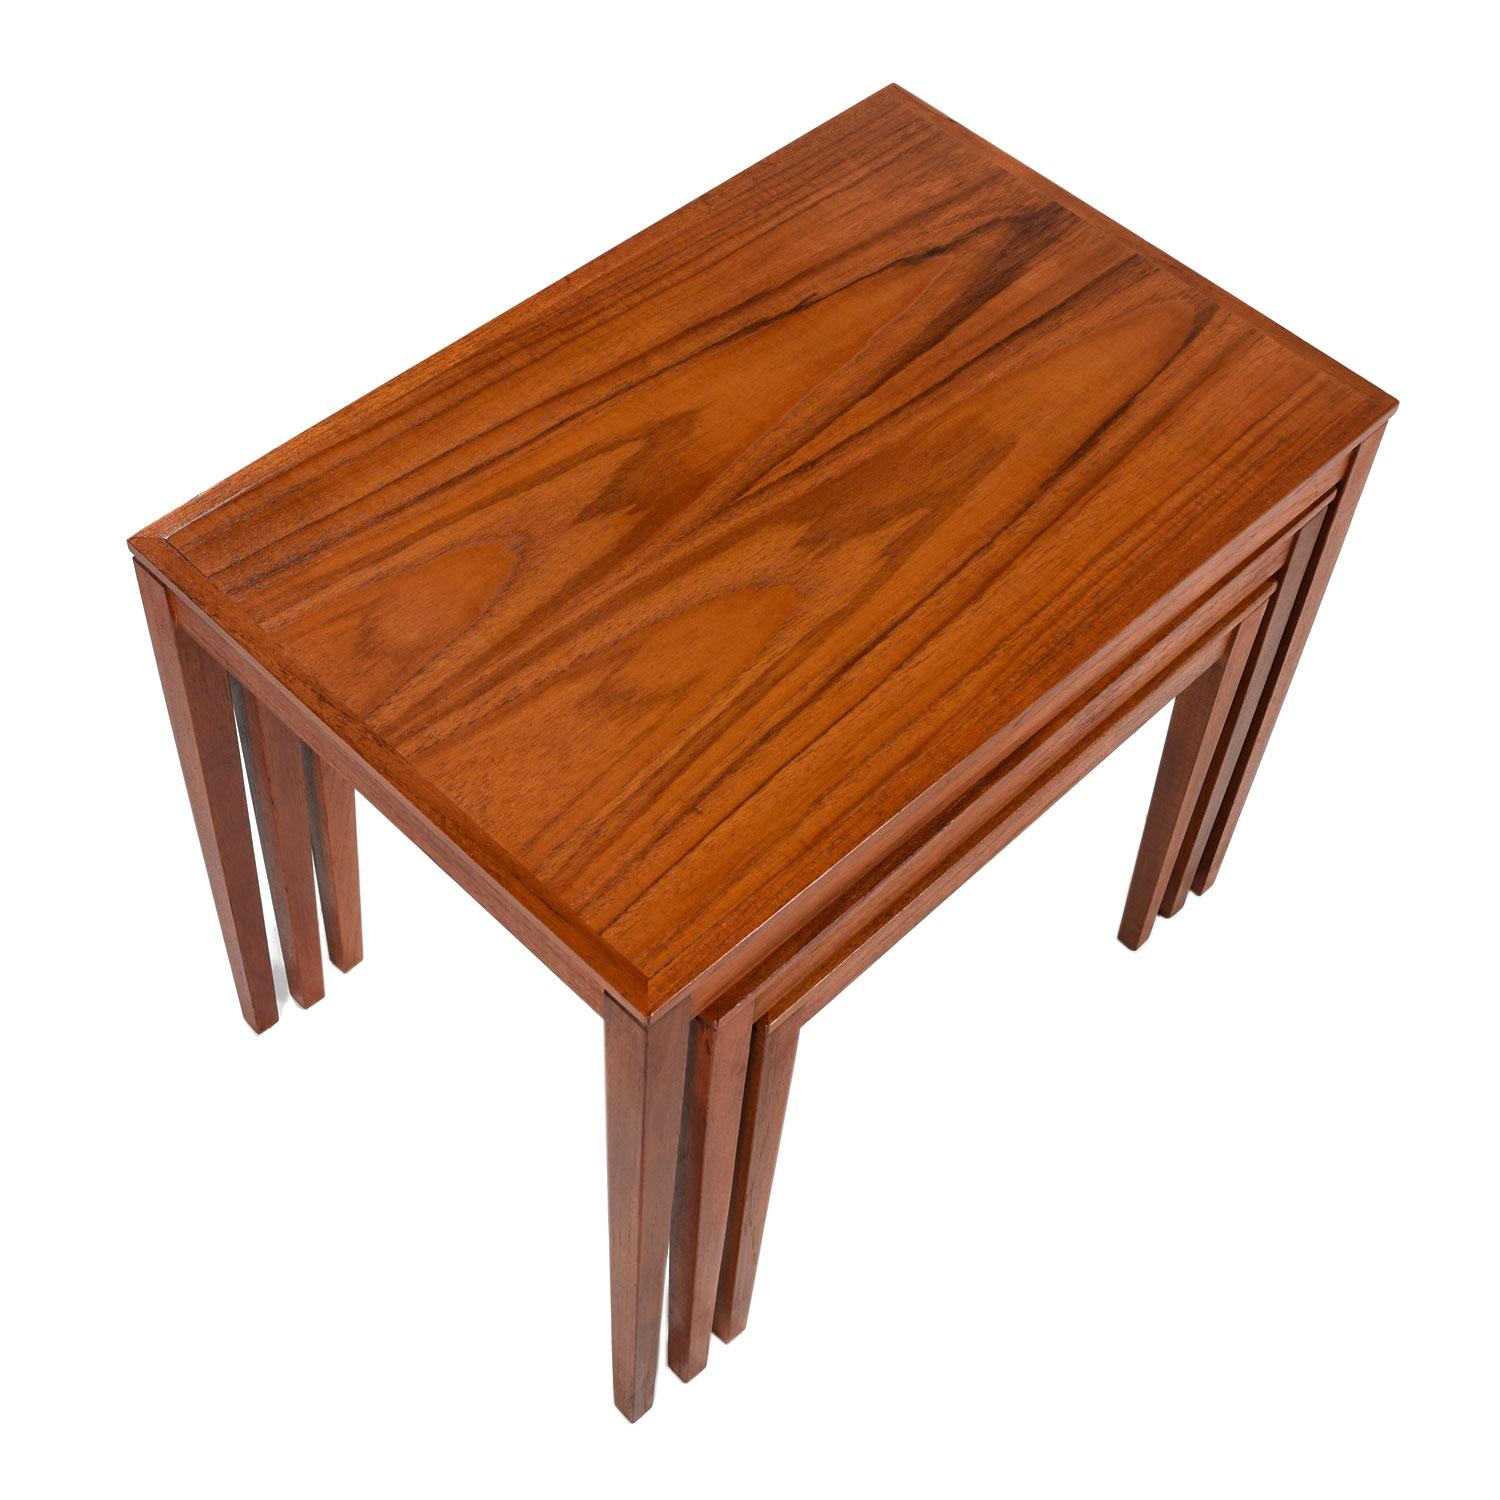 Set of three midcentury Scandinavian Modern Danish teak nesting tables of ascending size. Fine construction, solid teak bolt-on legs and old growth, fiery, cathedral grain are just a few notable qualities. Seamless joinery and classic Danish design